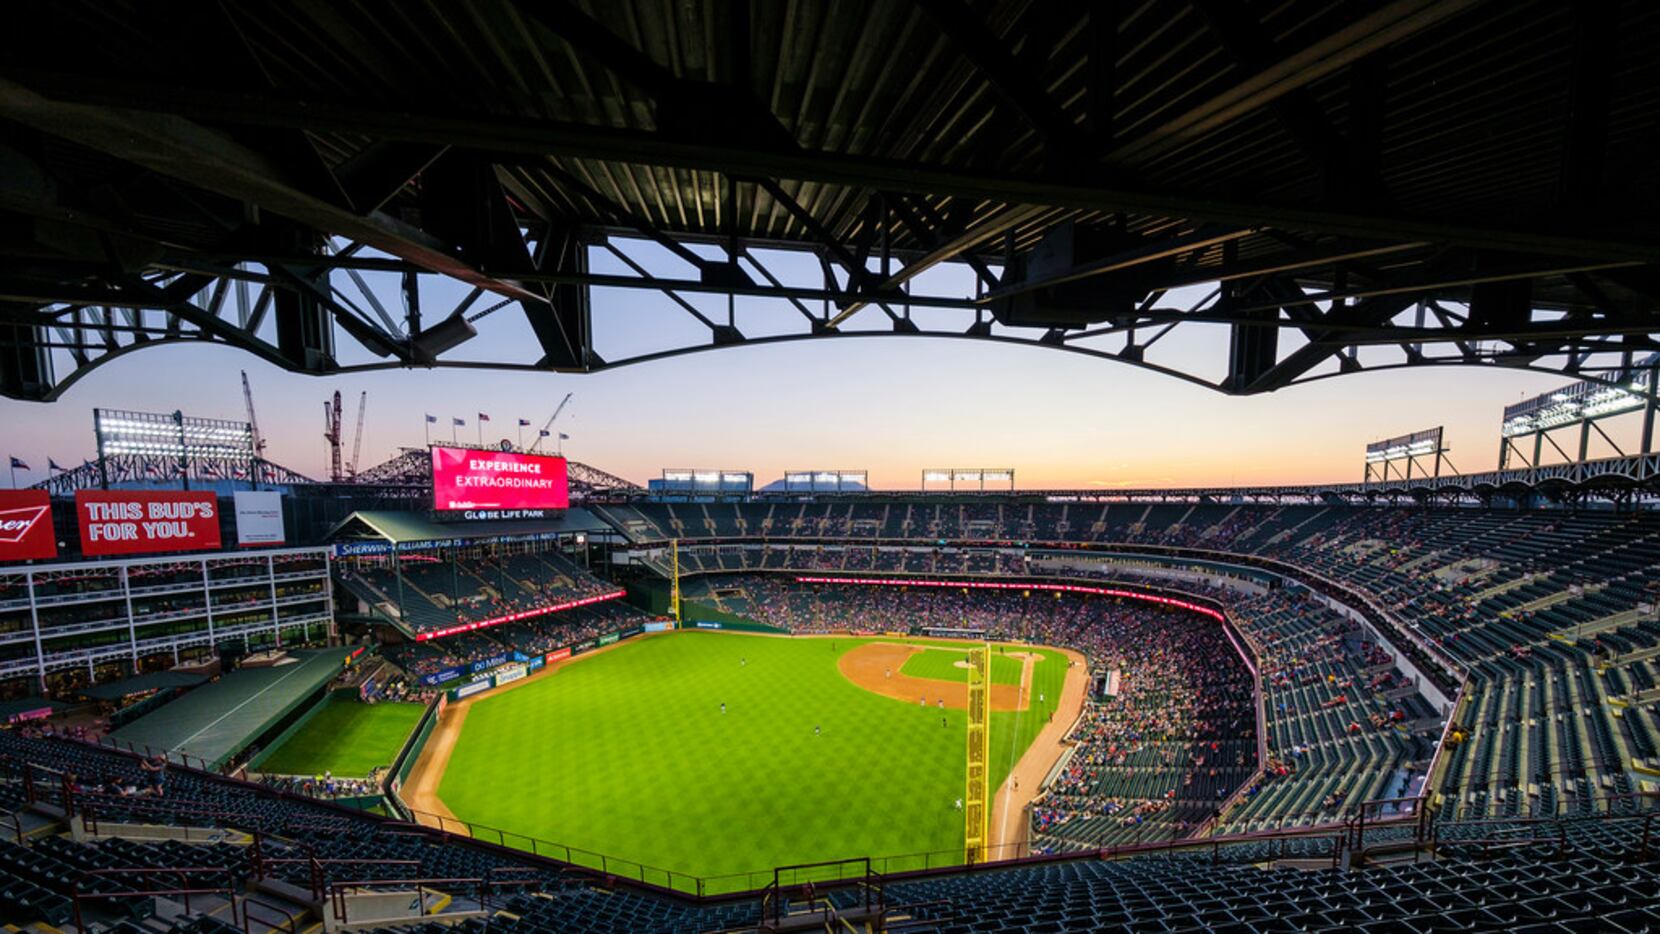 Globe Life Park, Home of the Texas Rangers, Debuts Over-The-Top